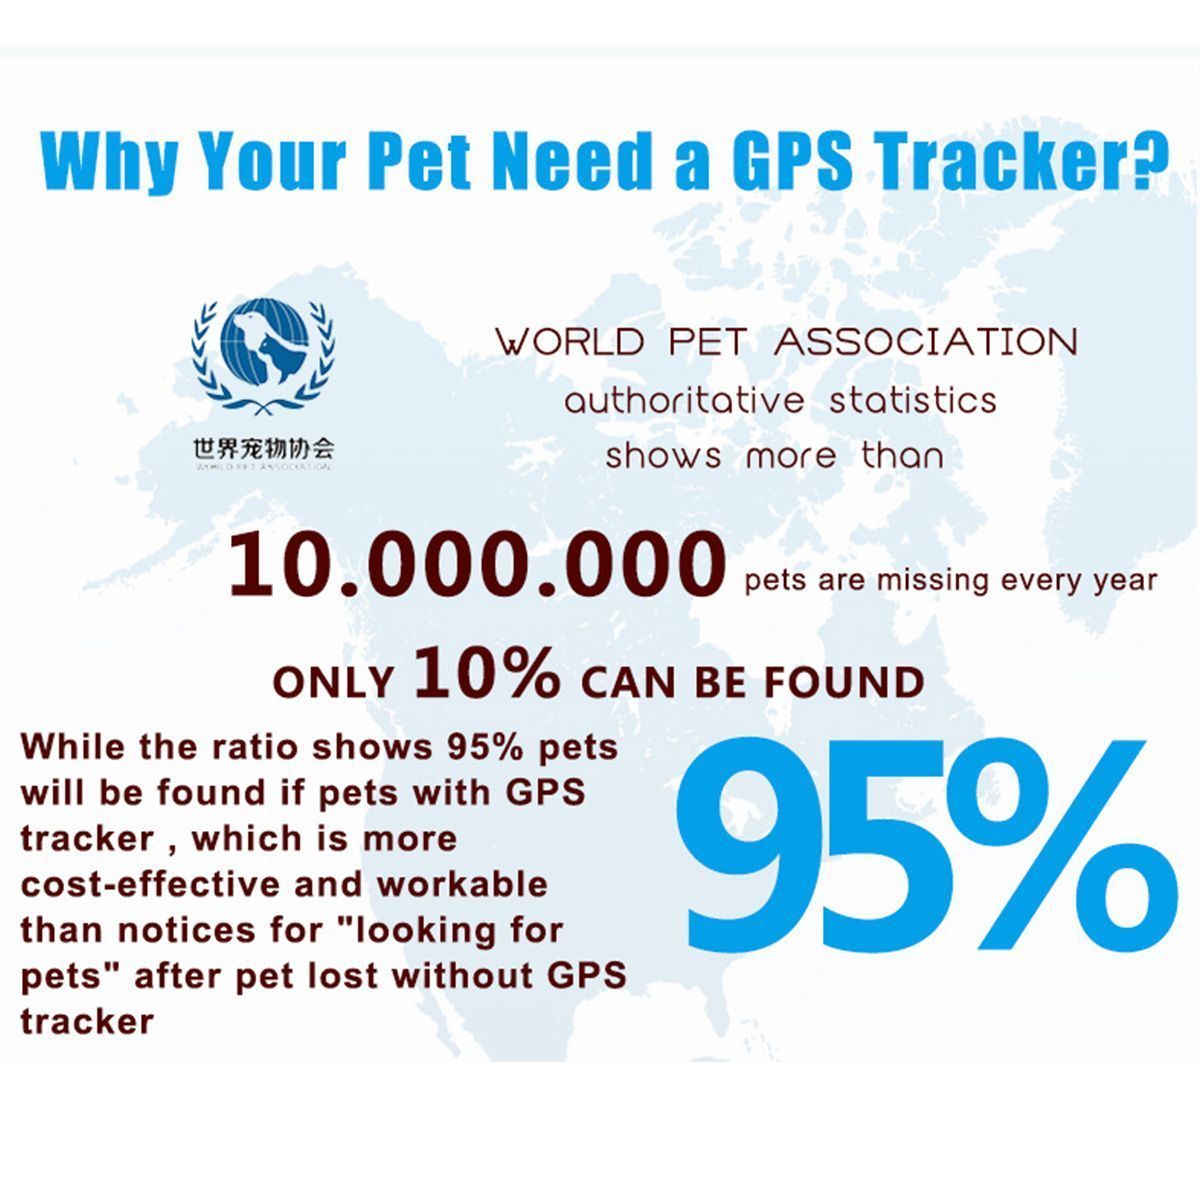 Mini-Waterproof-Locator-Dog-Cat-Pet-GPS-Tracker-Tracking-Devices-Real-Time-1253140